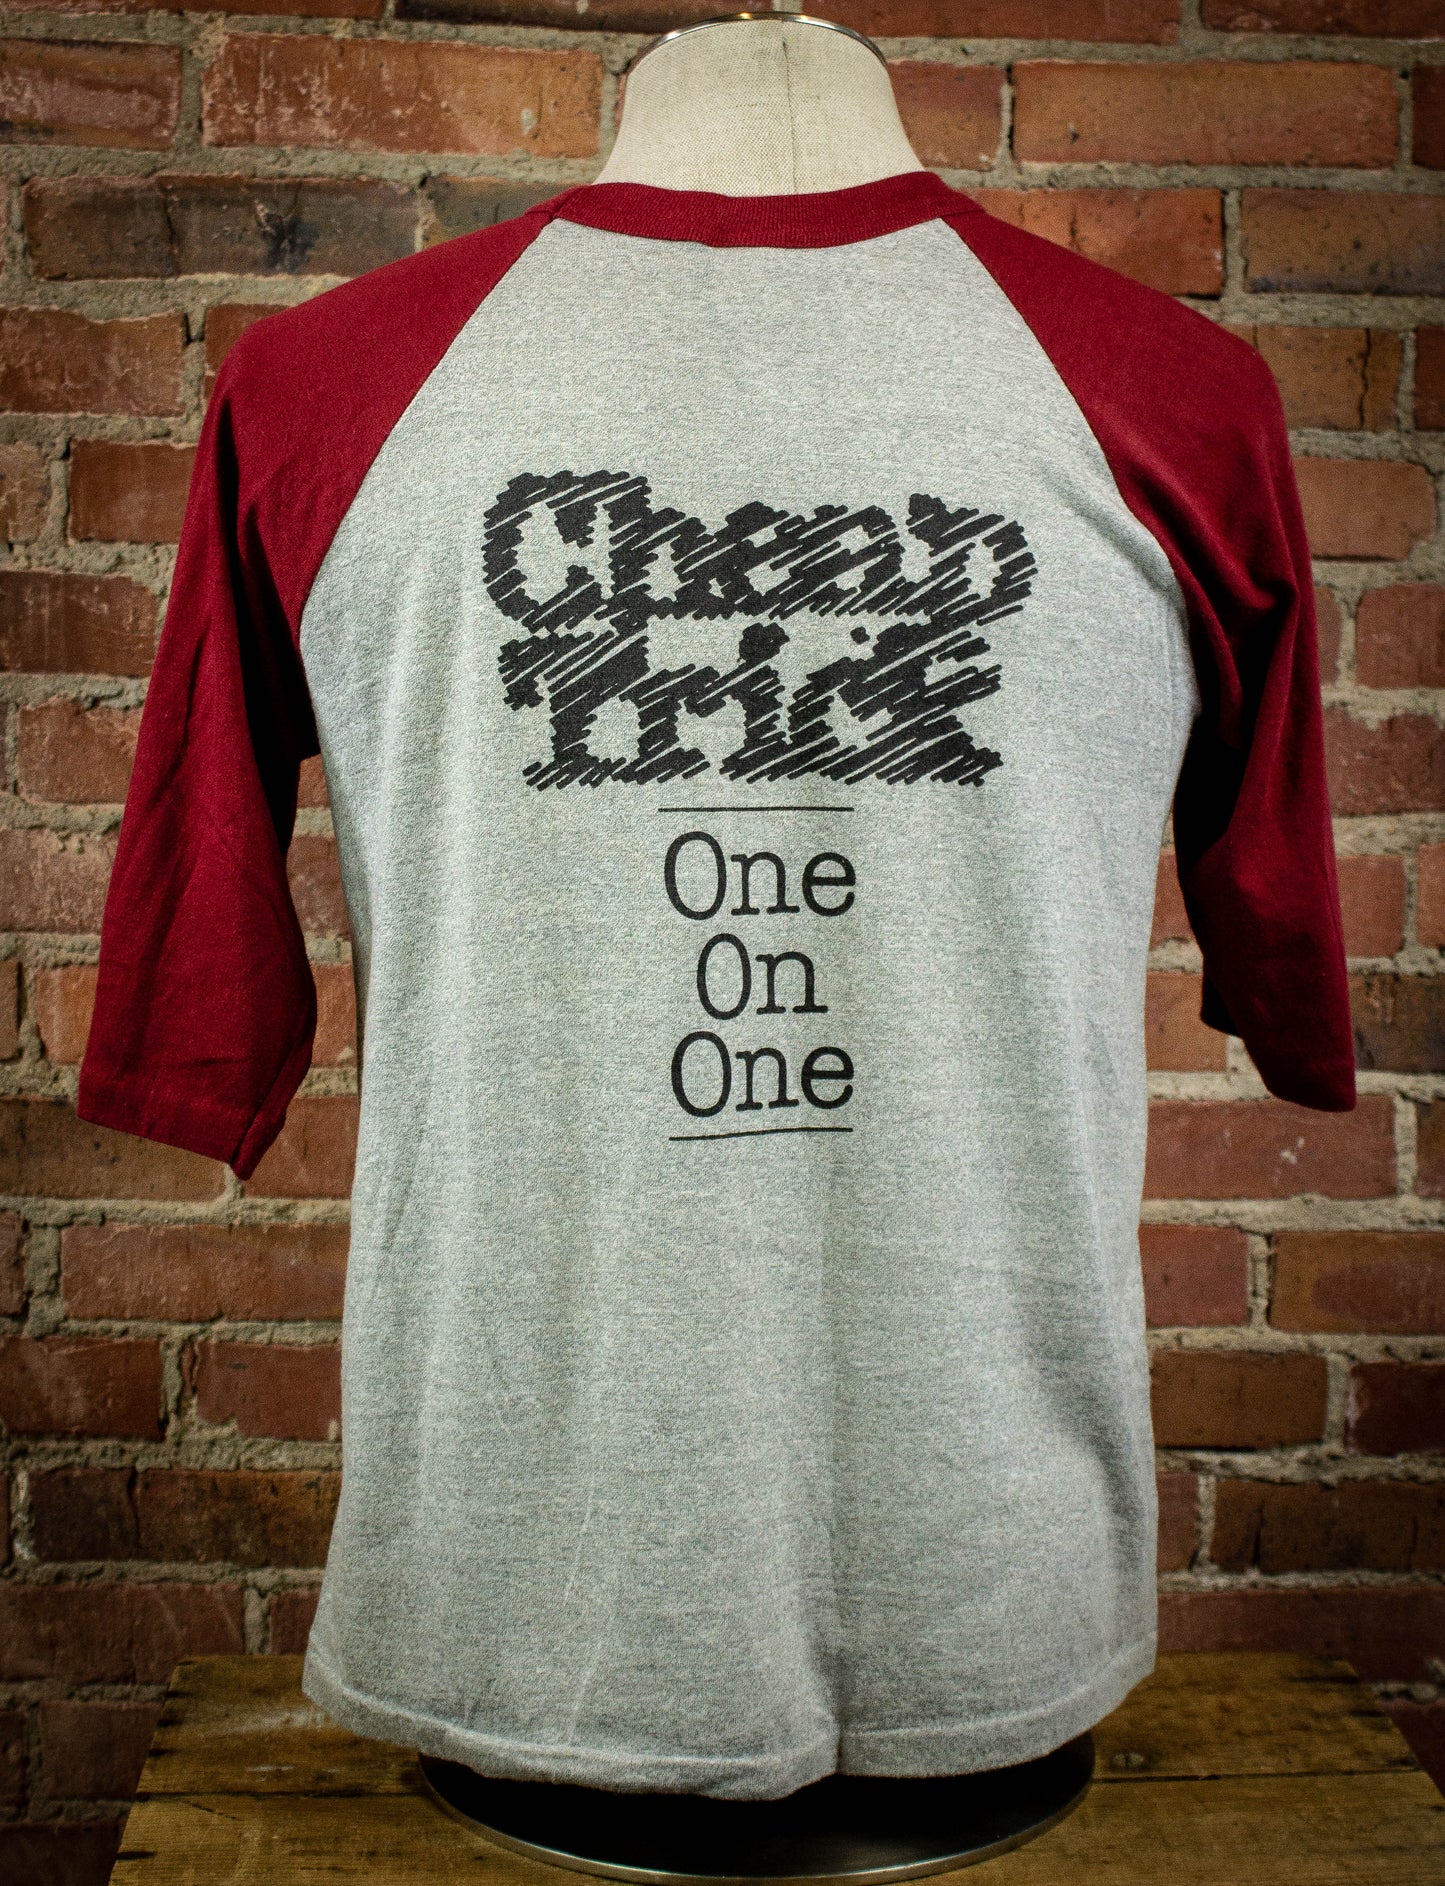 Vintage 1982 Cheap Trick One on One Tour Jersey Unisex Large